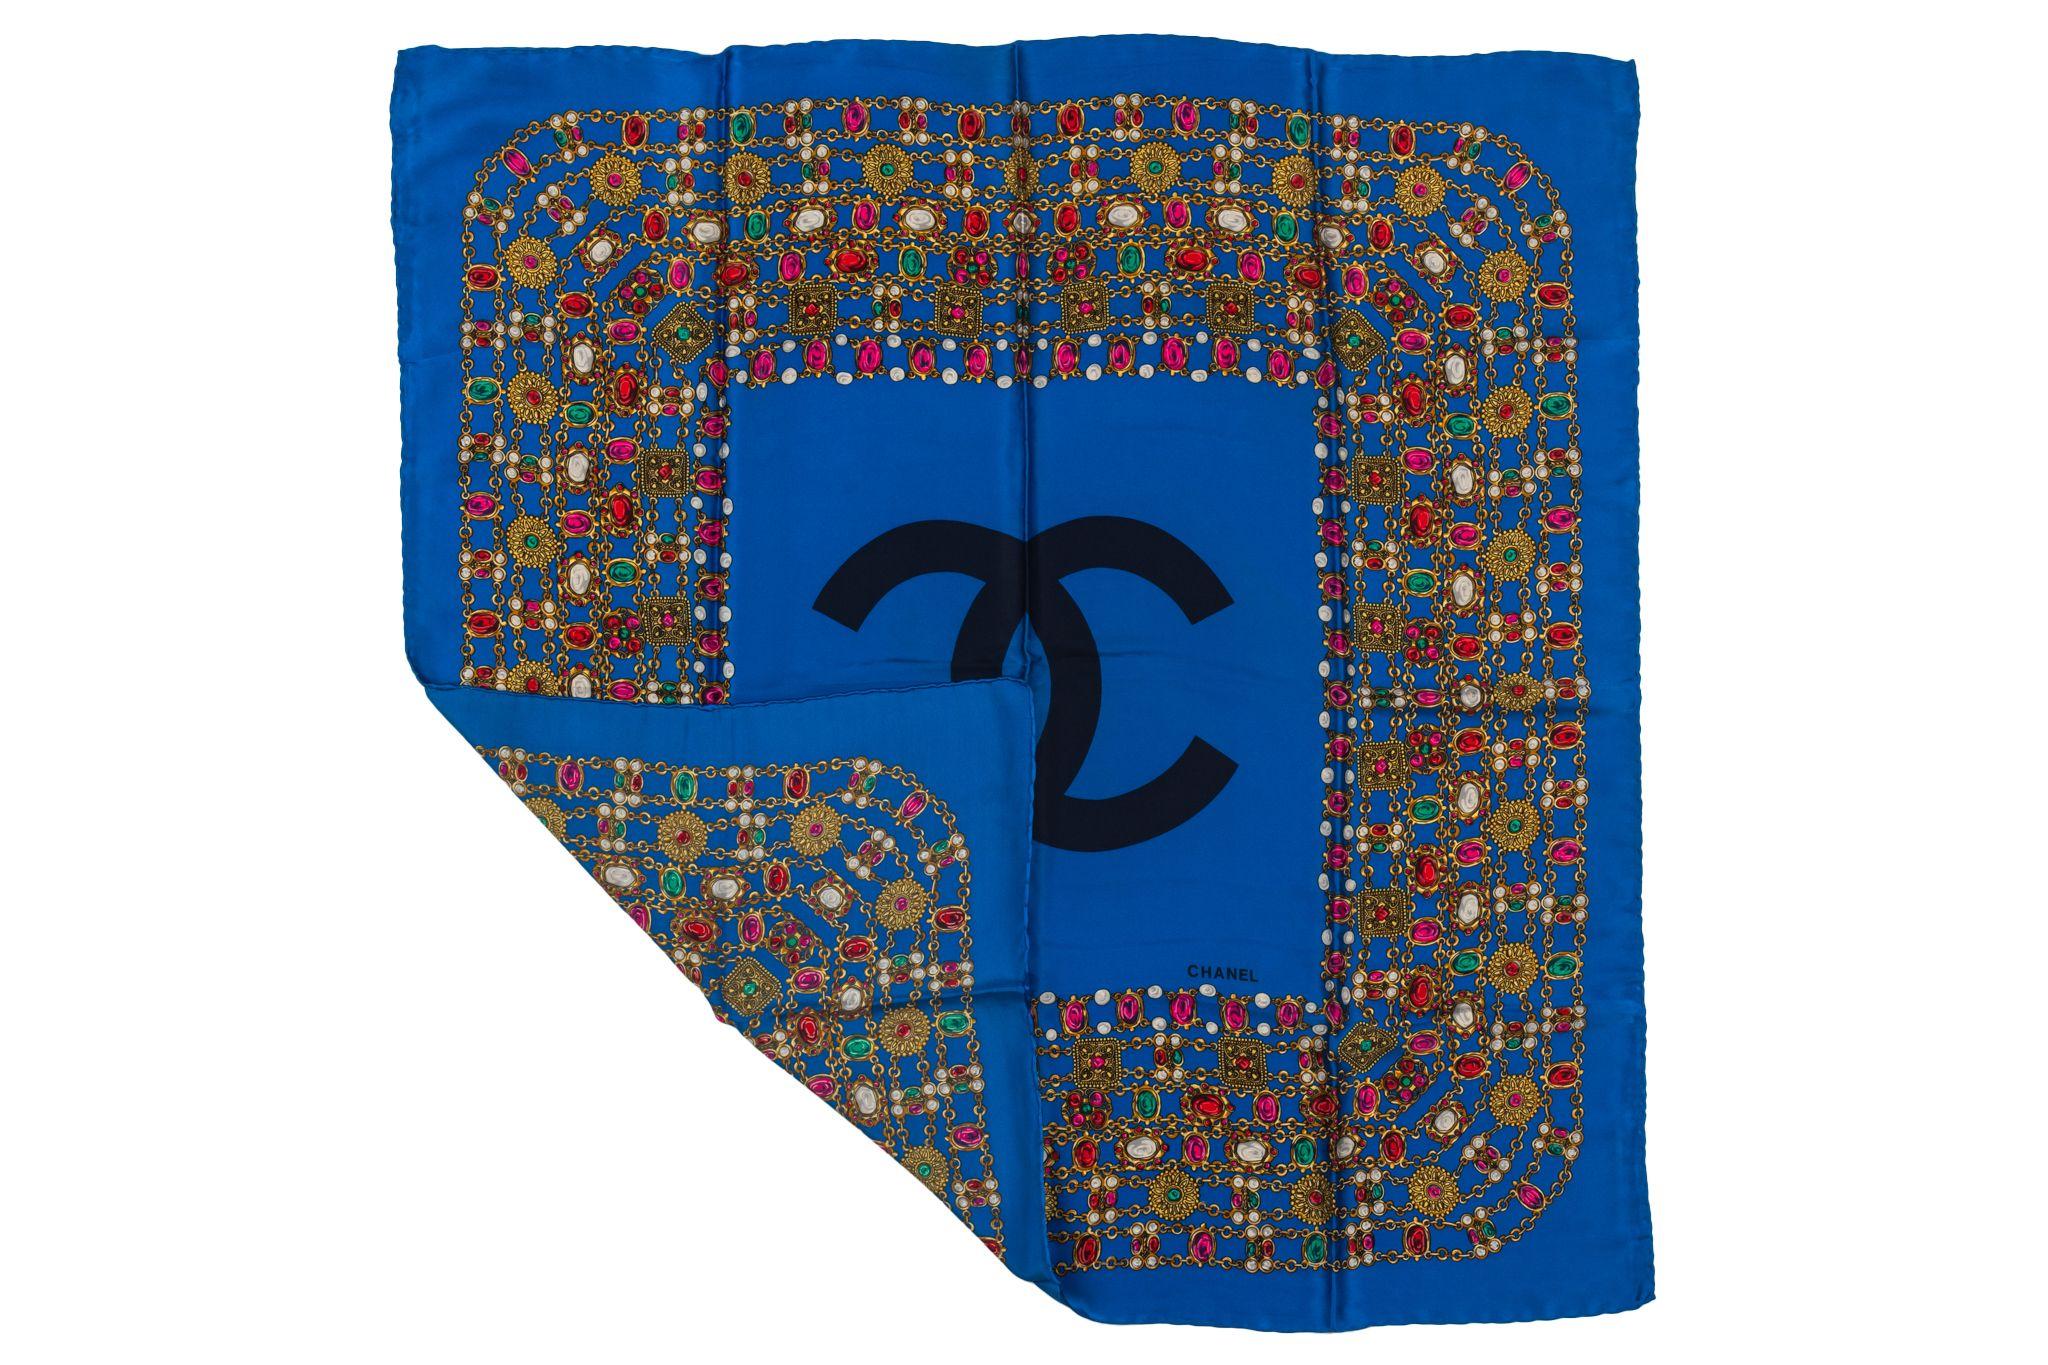 Chanel Shawl in a vibrant blue with a CC logo in the middle surrounded by a pattern of different gripoix jewelry stones. Piece is in excellent condition.